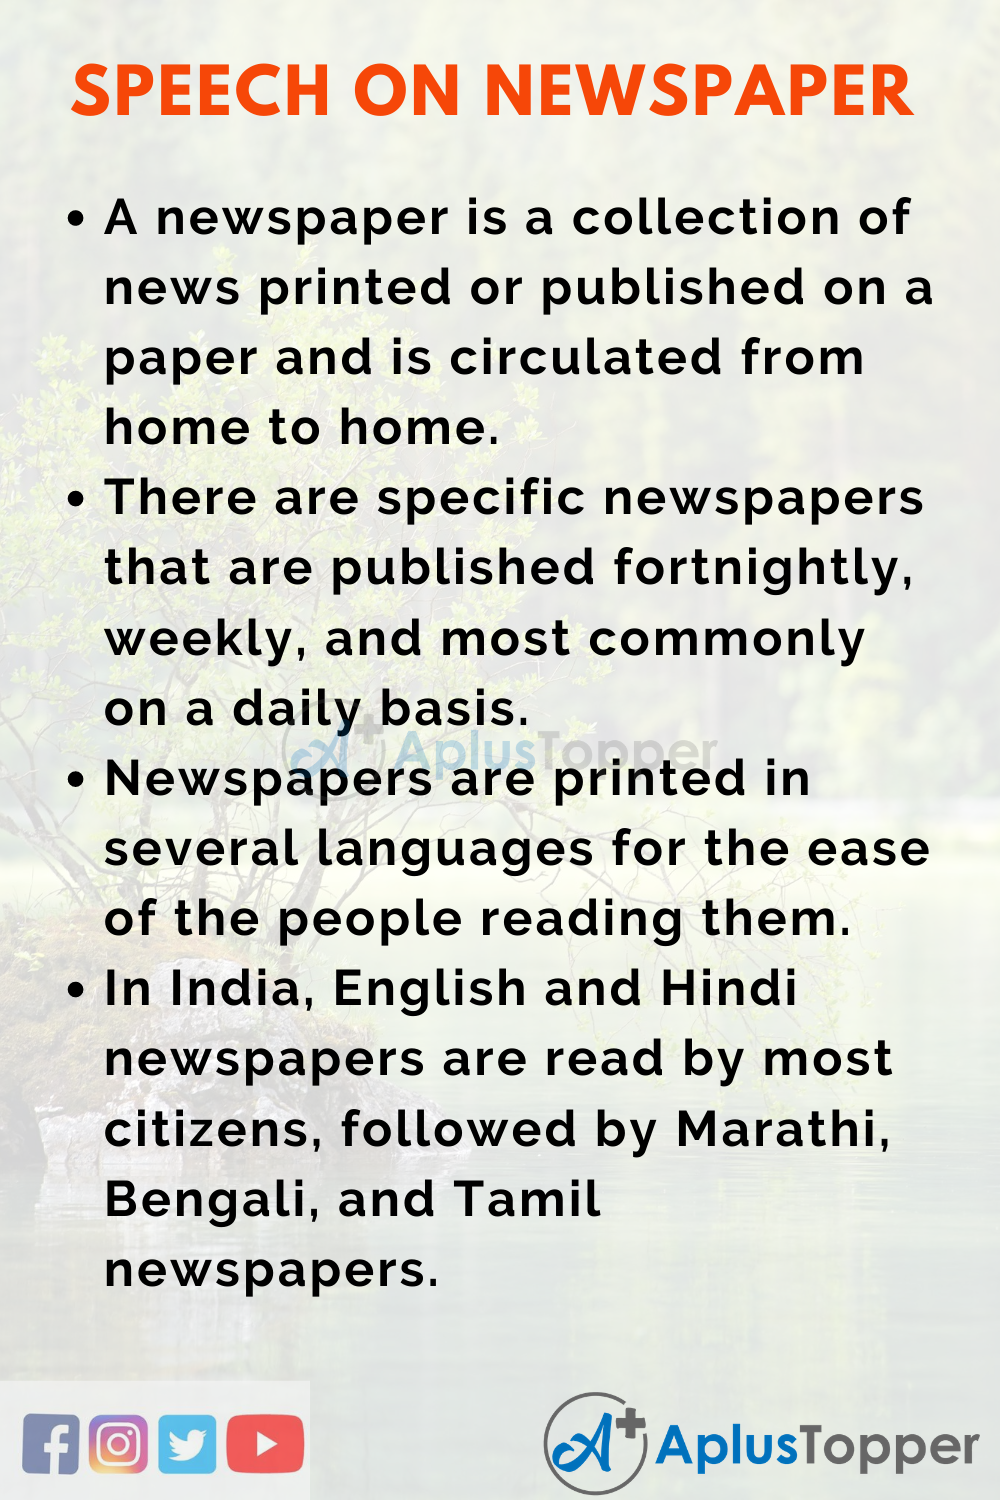 examples of direct speech in newspaper articles